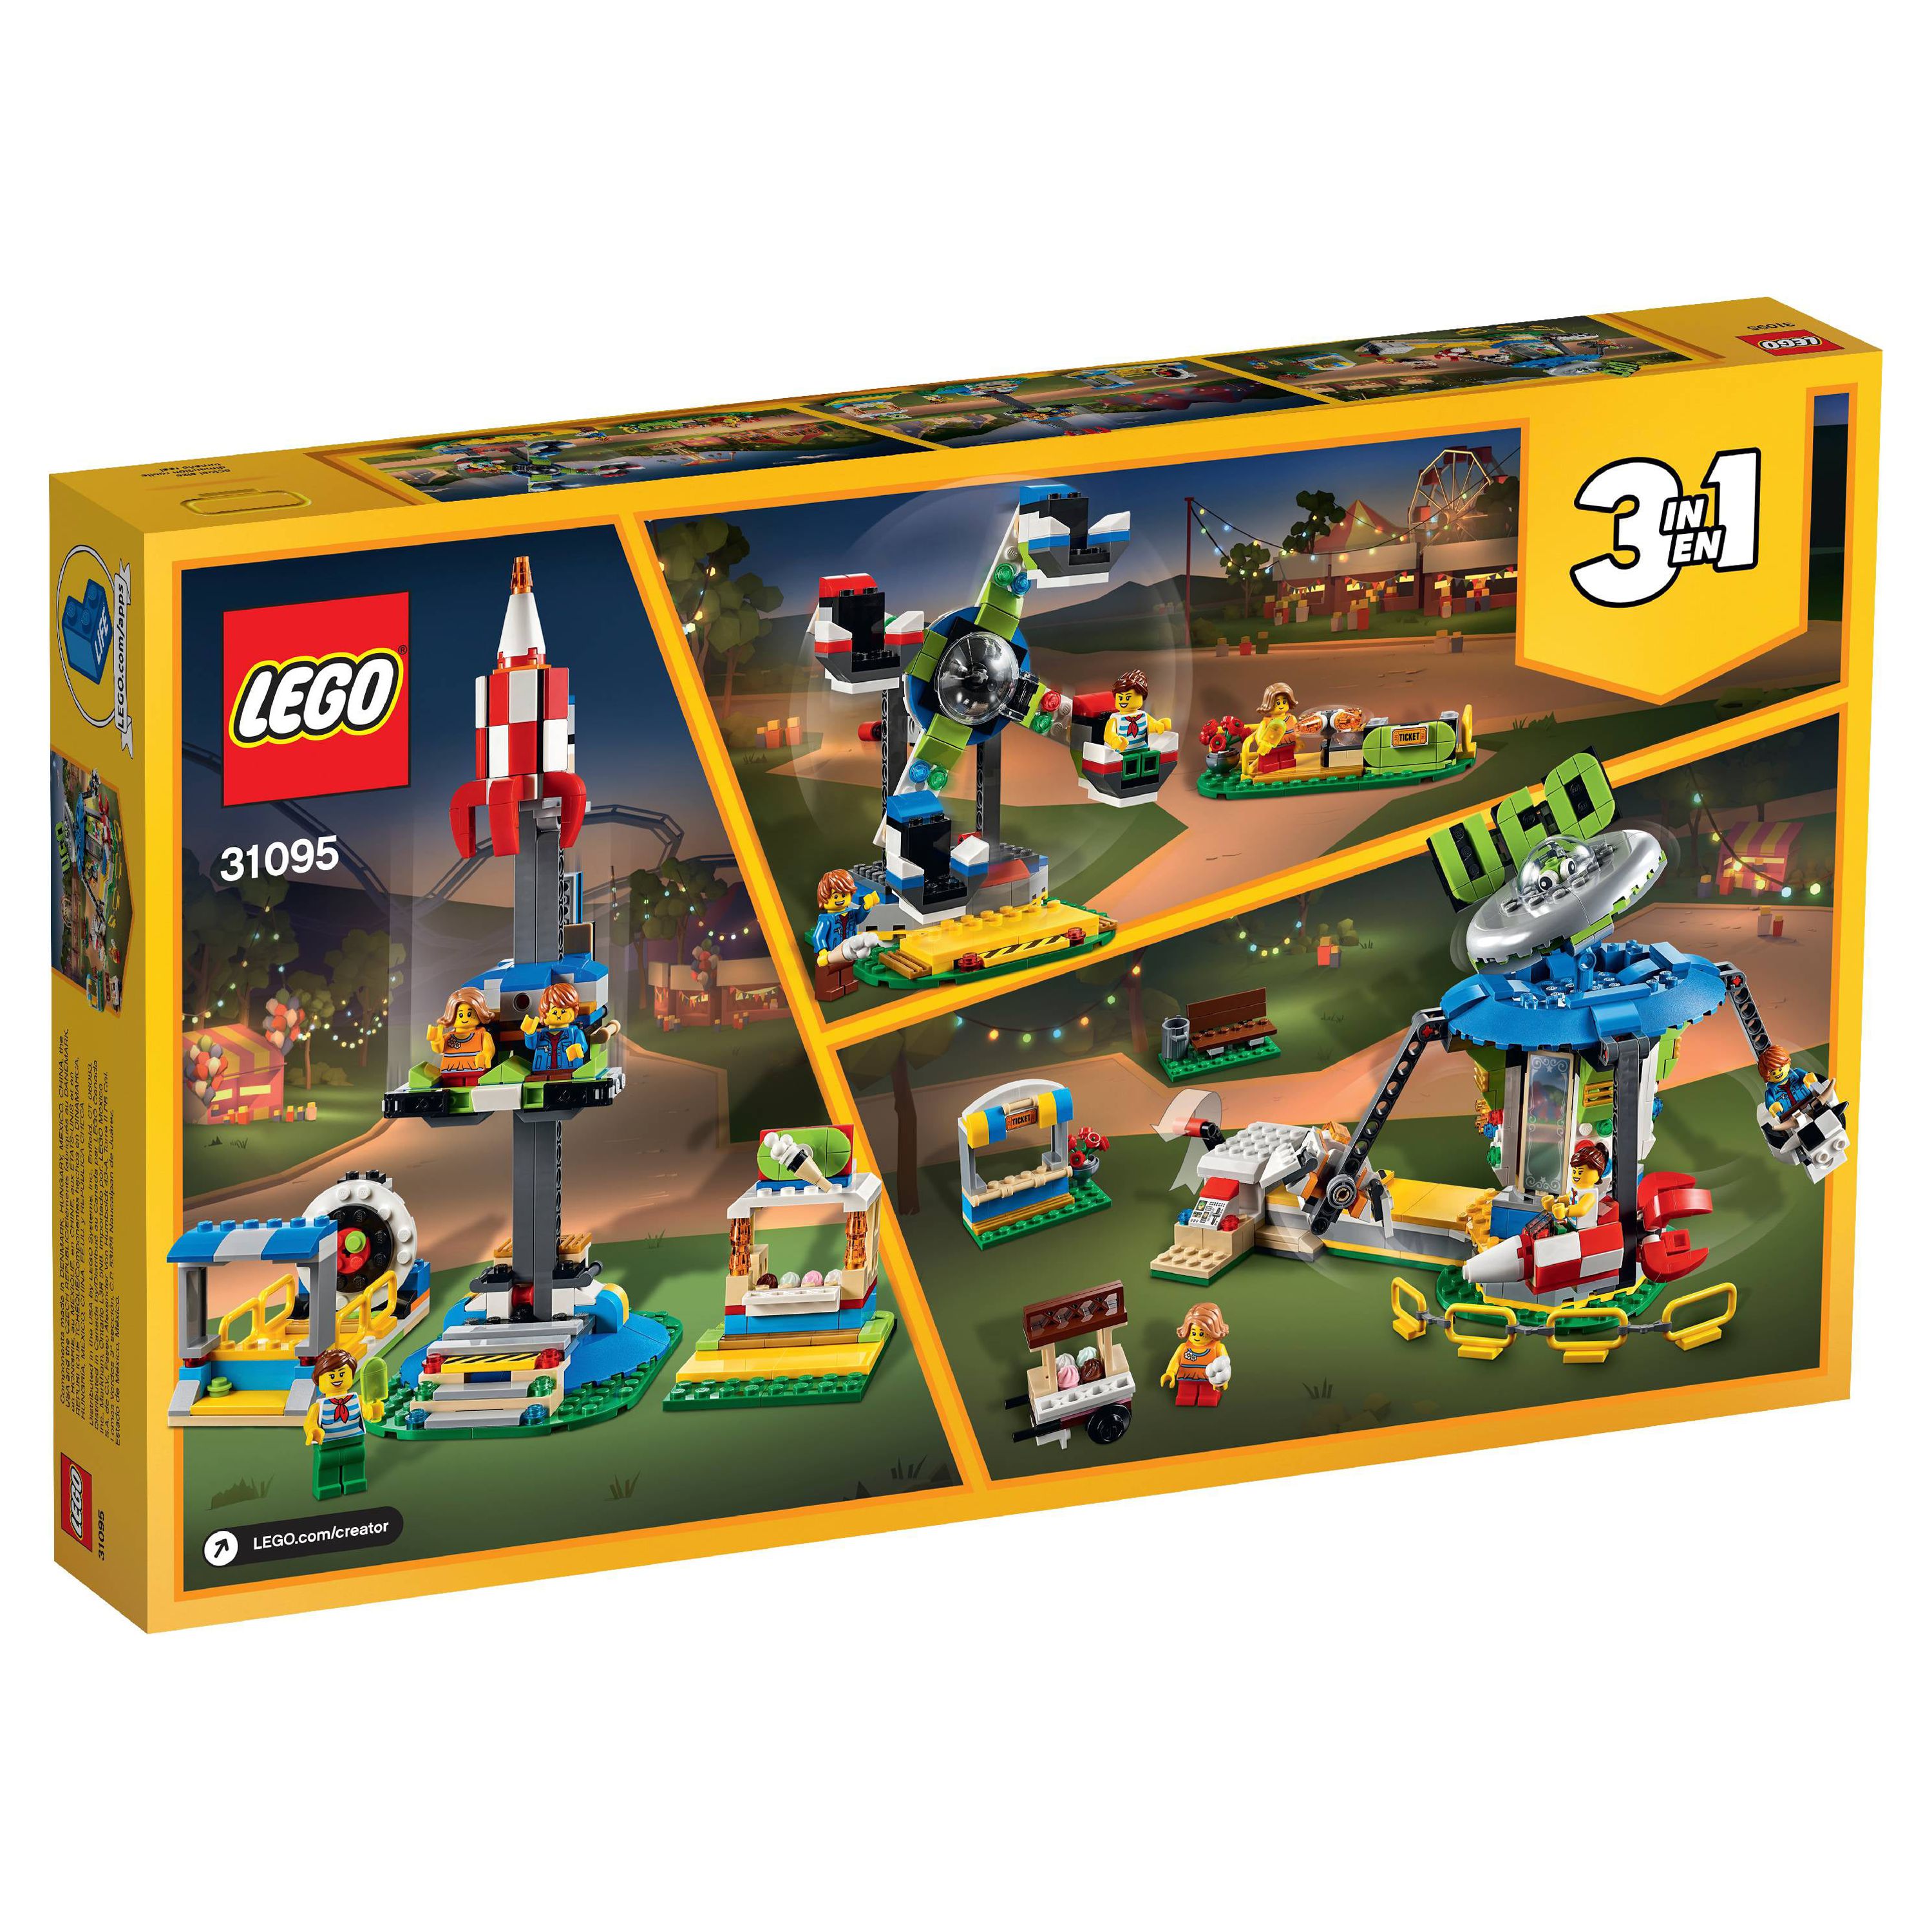 LEGO Creator Fairground Carousel 31095 Space-Themed Building Kit (595 Pieces) - image 5 of 8